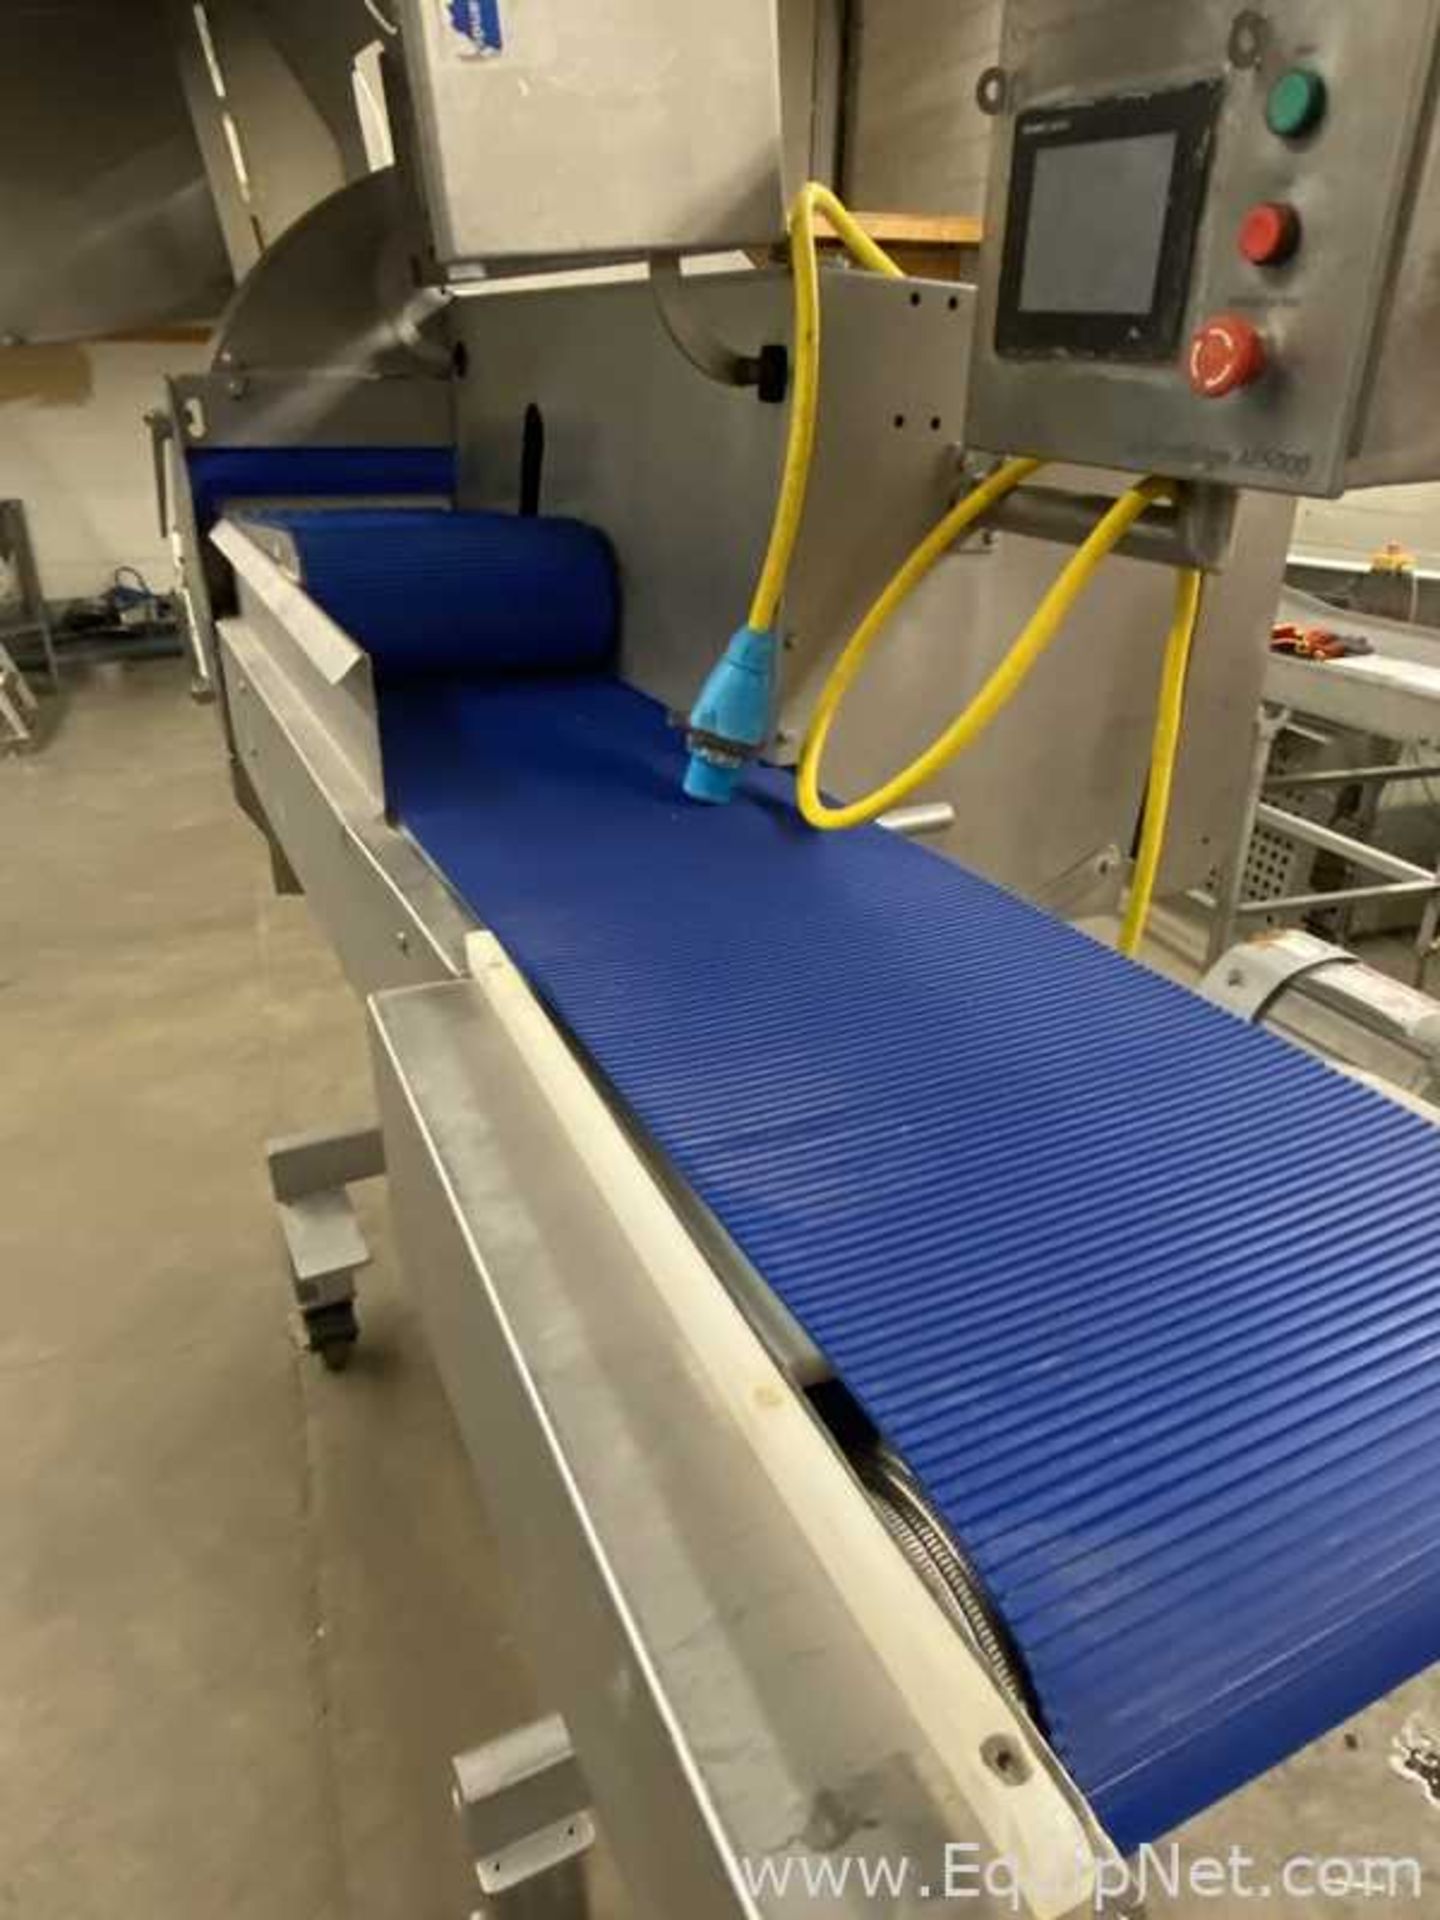 Carruthers AdvantEdge AE5000 Dicer With CV79000 Incline Conveyor Belt - Image 9 of 21